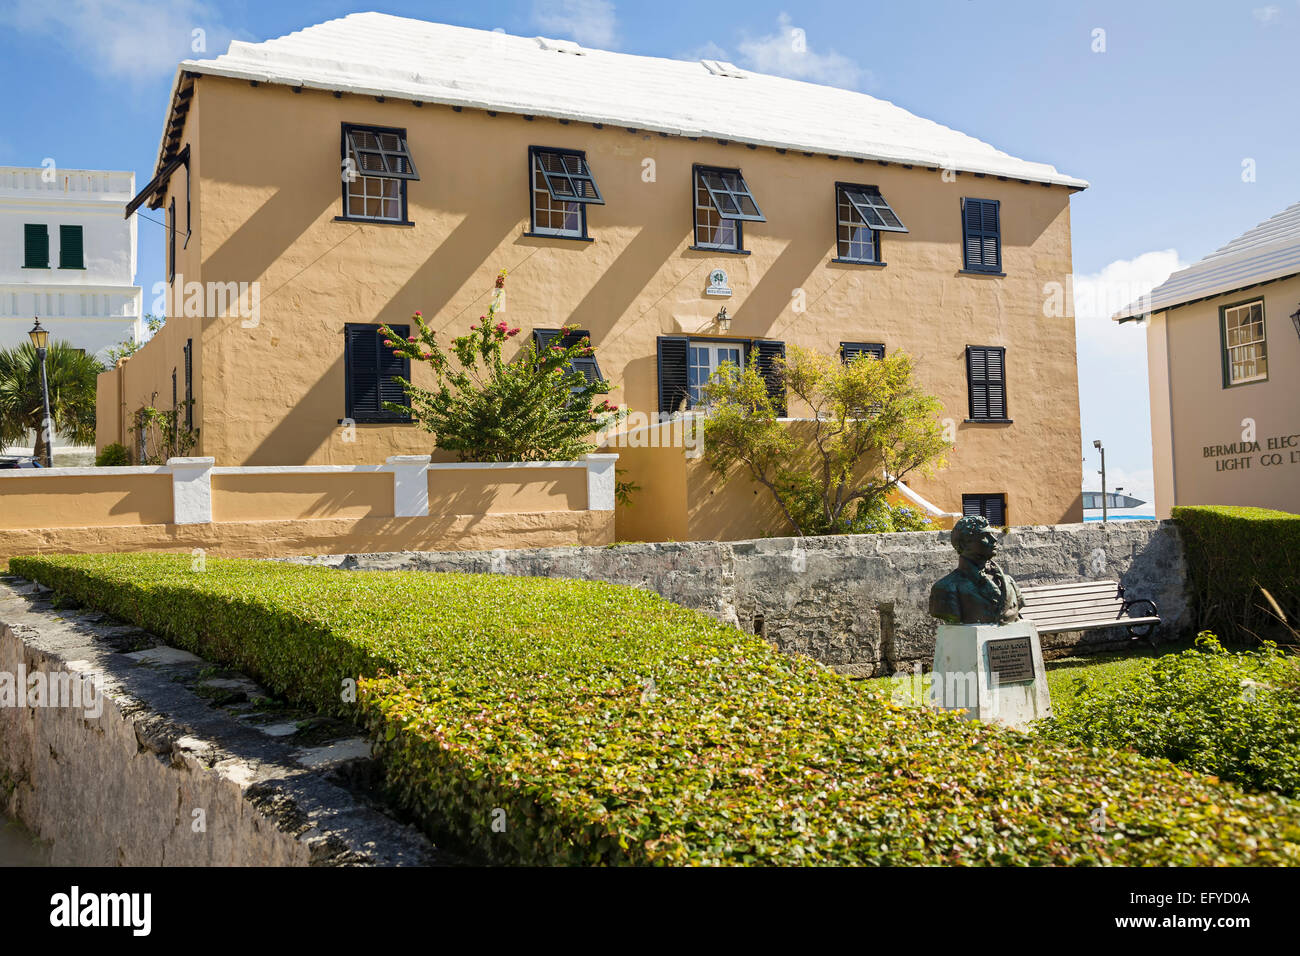 Building in St.George's, Bermuda. The monument to the Irish poet Thomas Moore in the middleground. Stock Photo